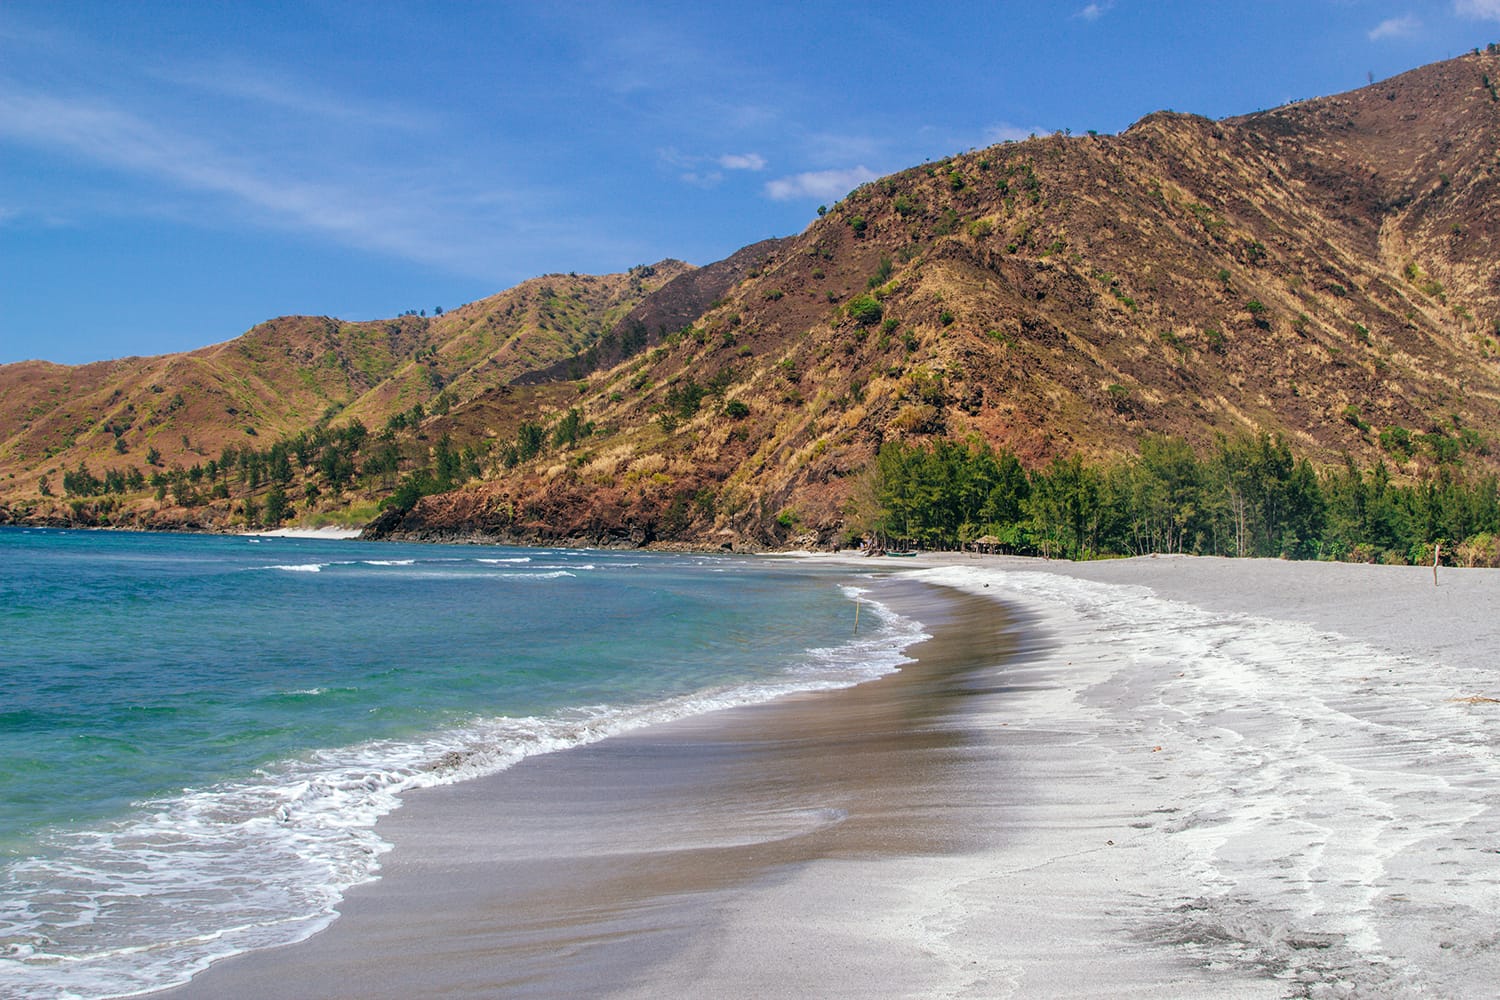 Nagsasa Cove, a beach strewn with volcanic ash from Mt. Pinatubo and covered by sea pine trees in San Antonio, Zambales, Philippines